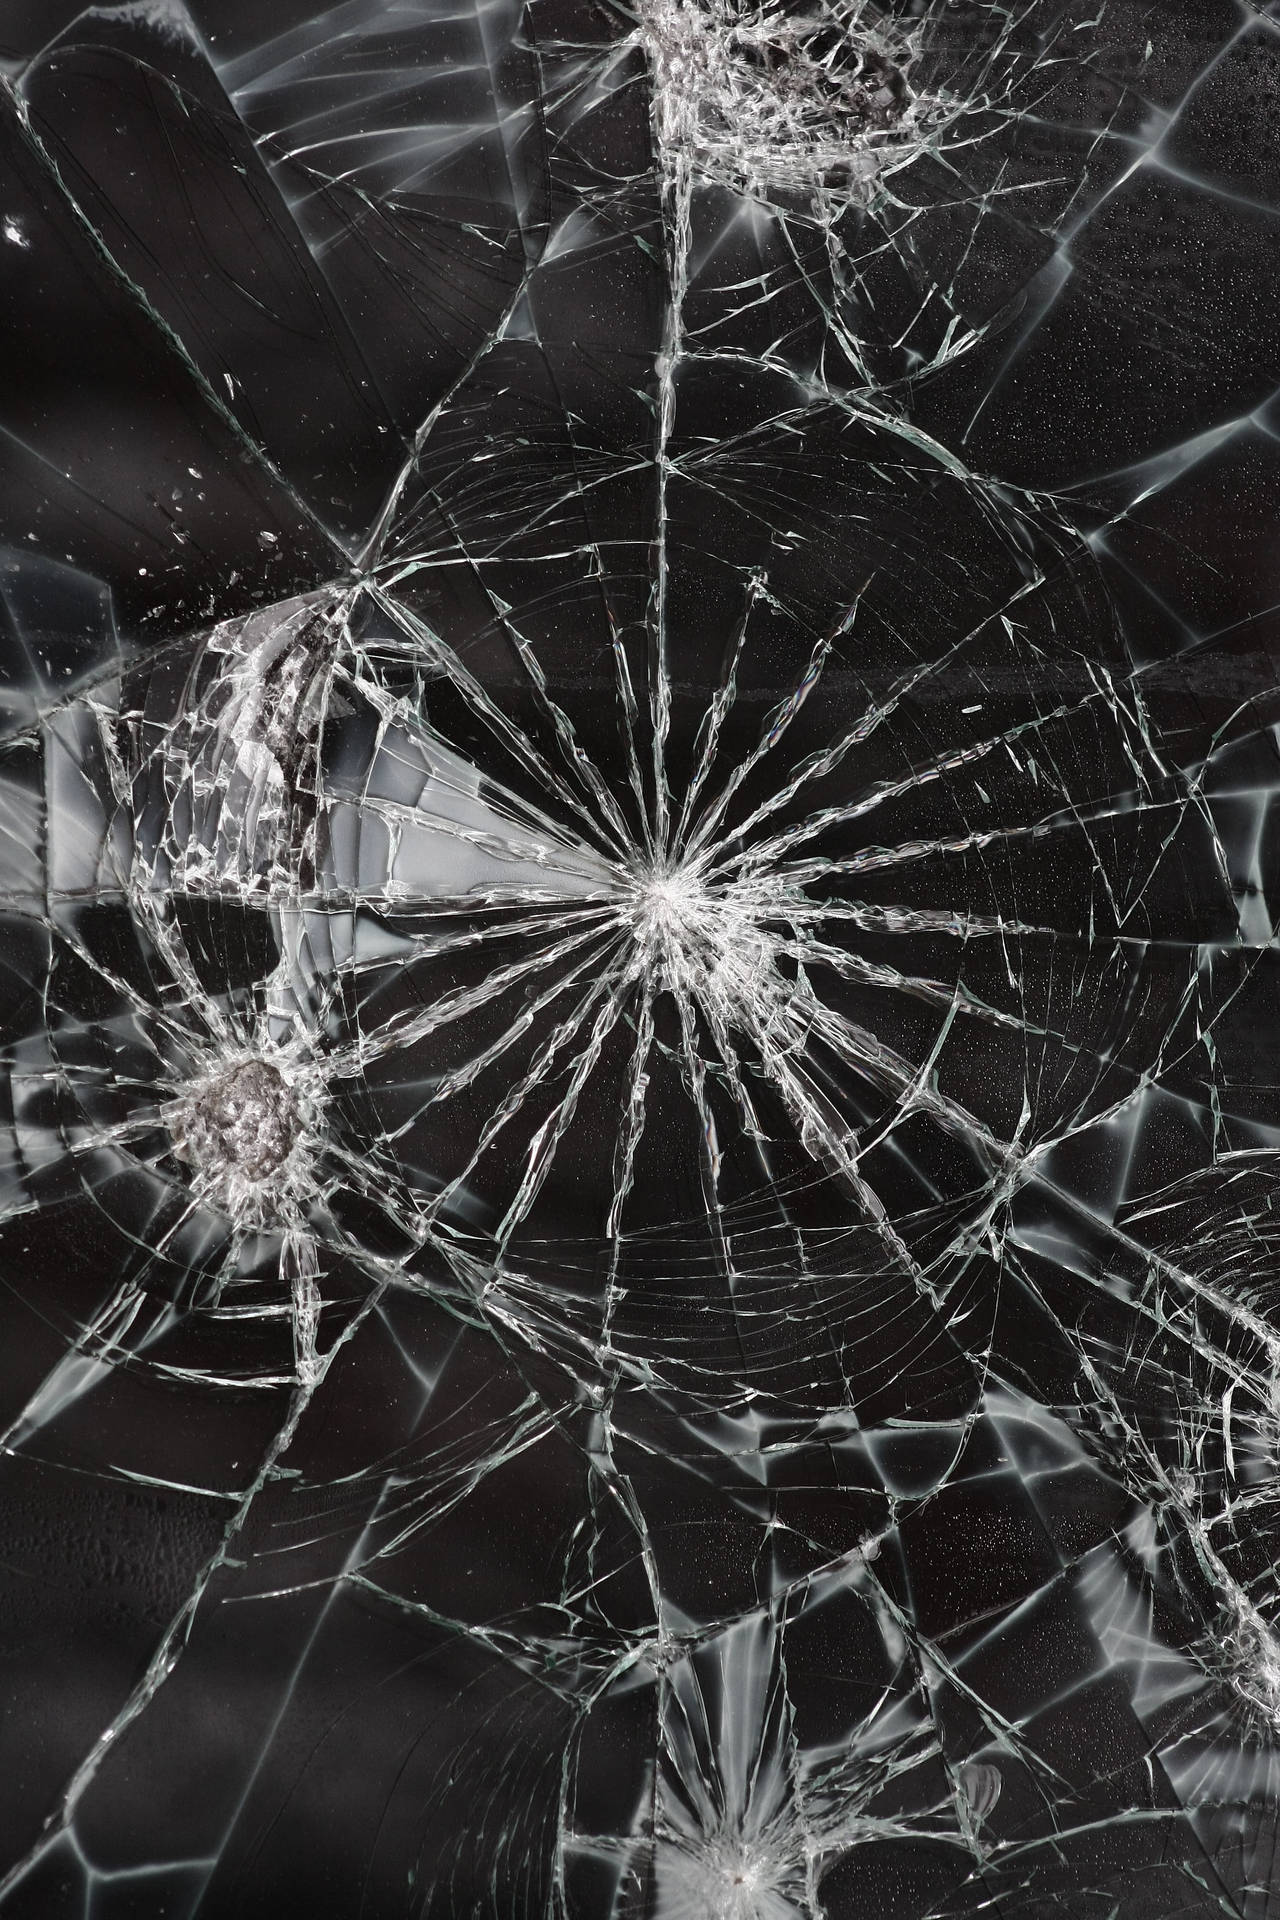 Shattered Illusions: A Broken Glass close-up Wallpaper